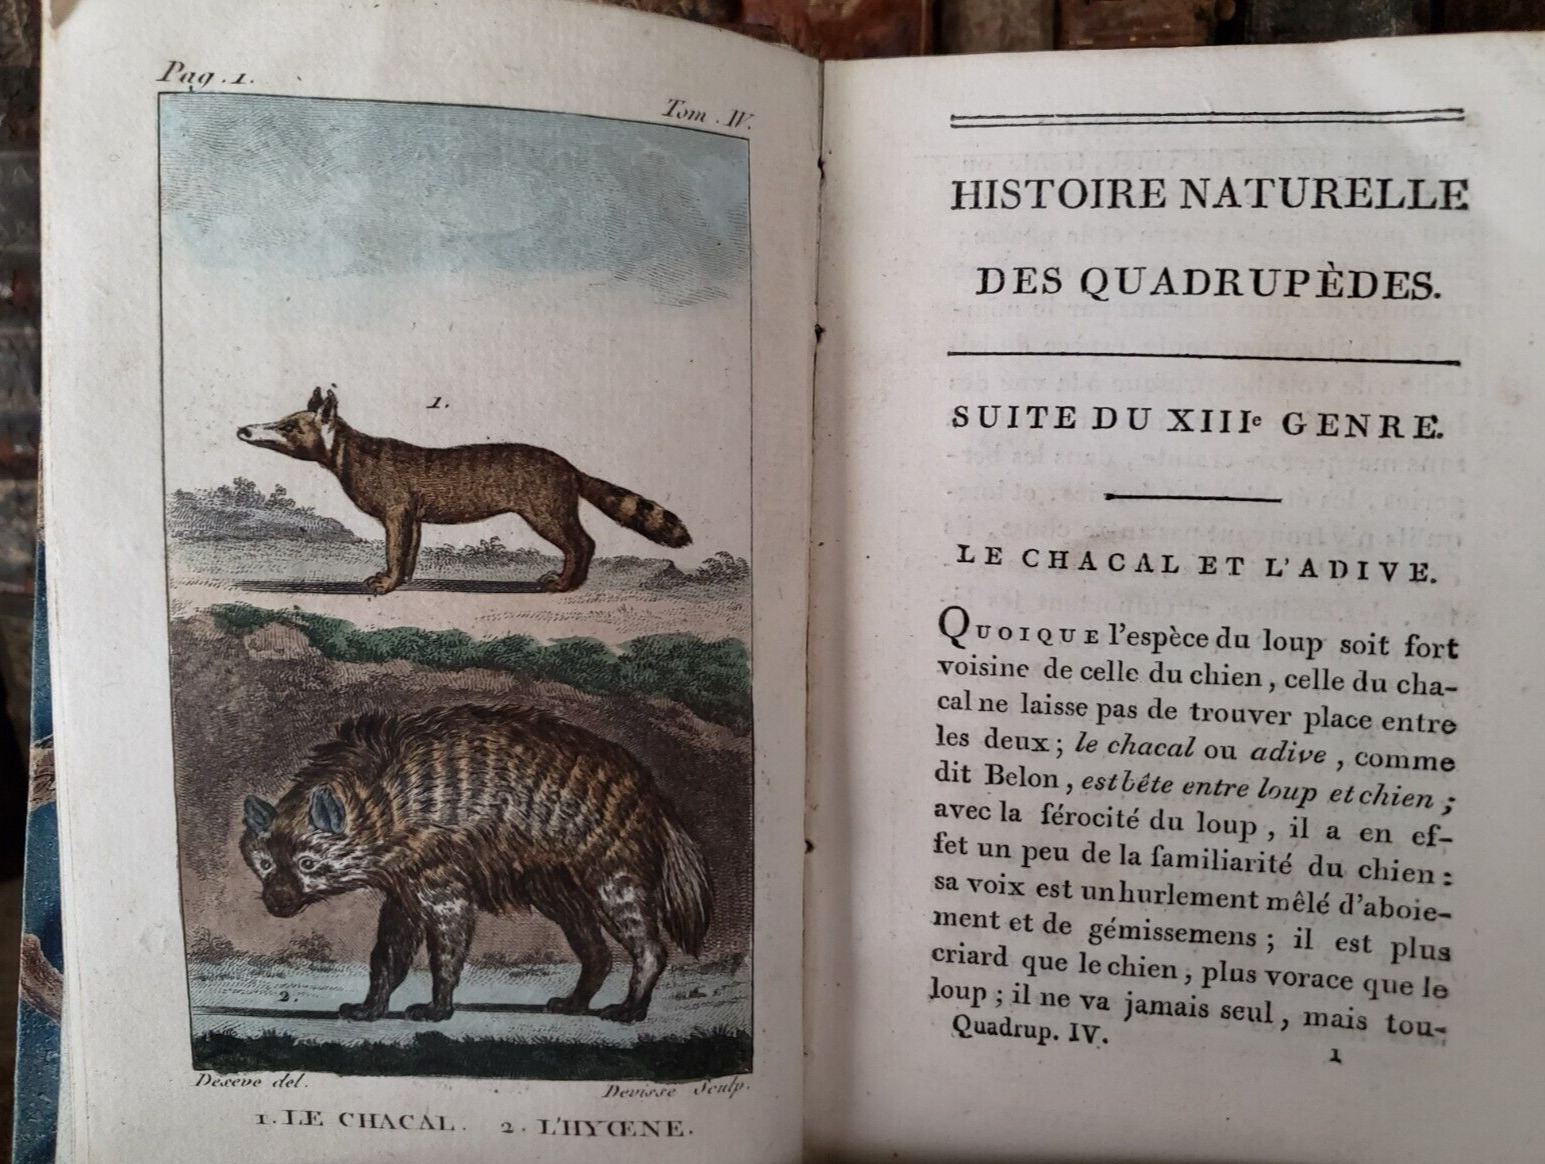 1802 BUFFON NATURAL HISTORY OF QUADRUPEDS With 35 Colored Engravings